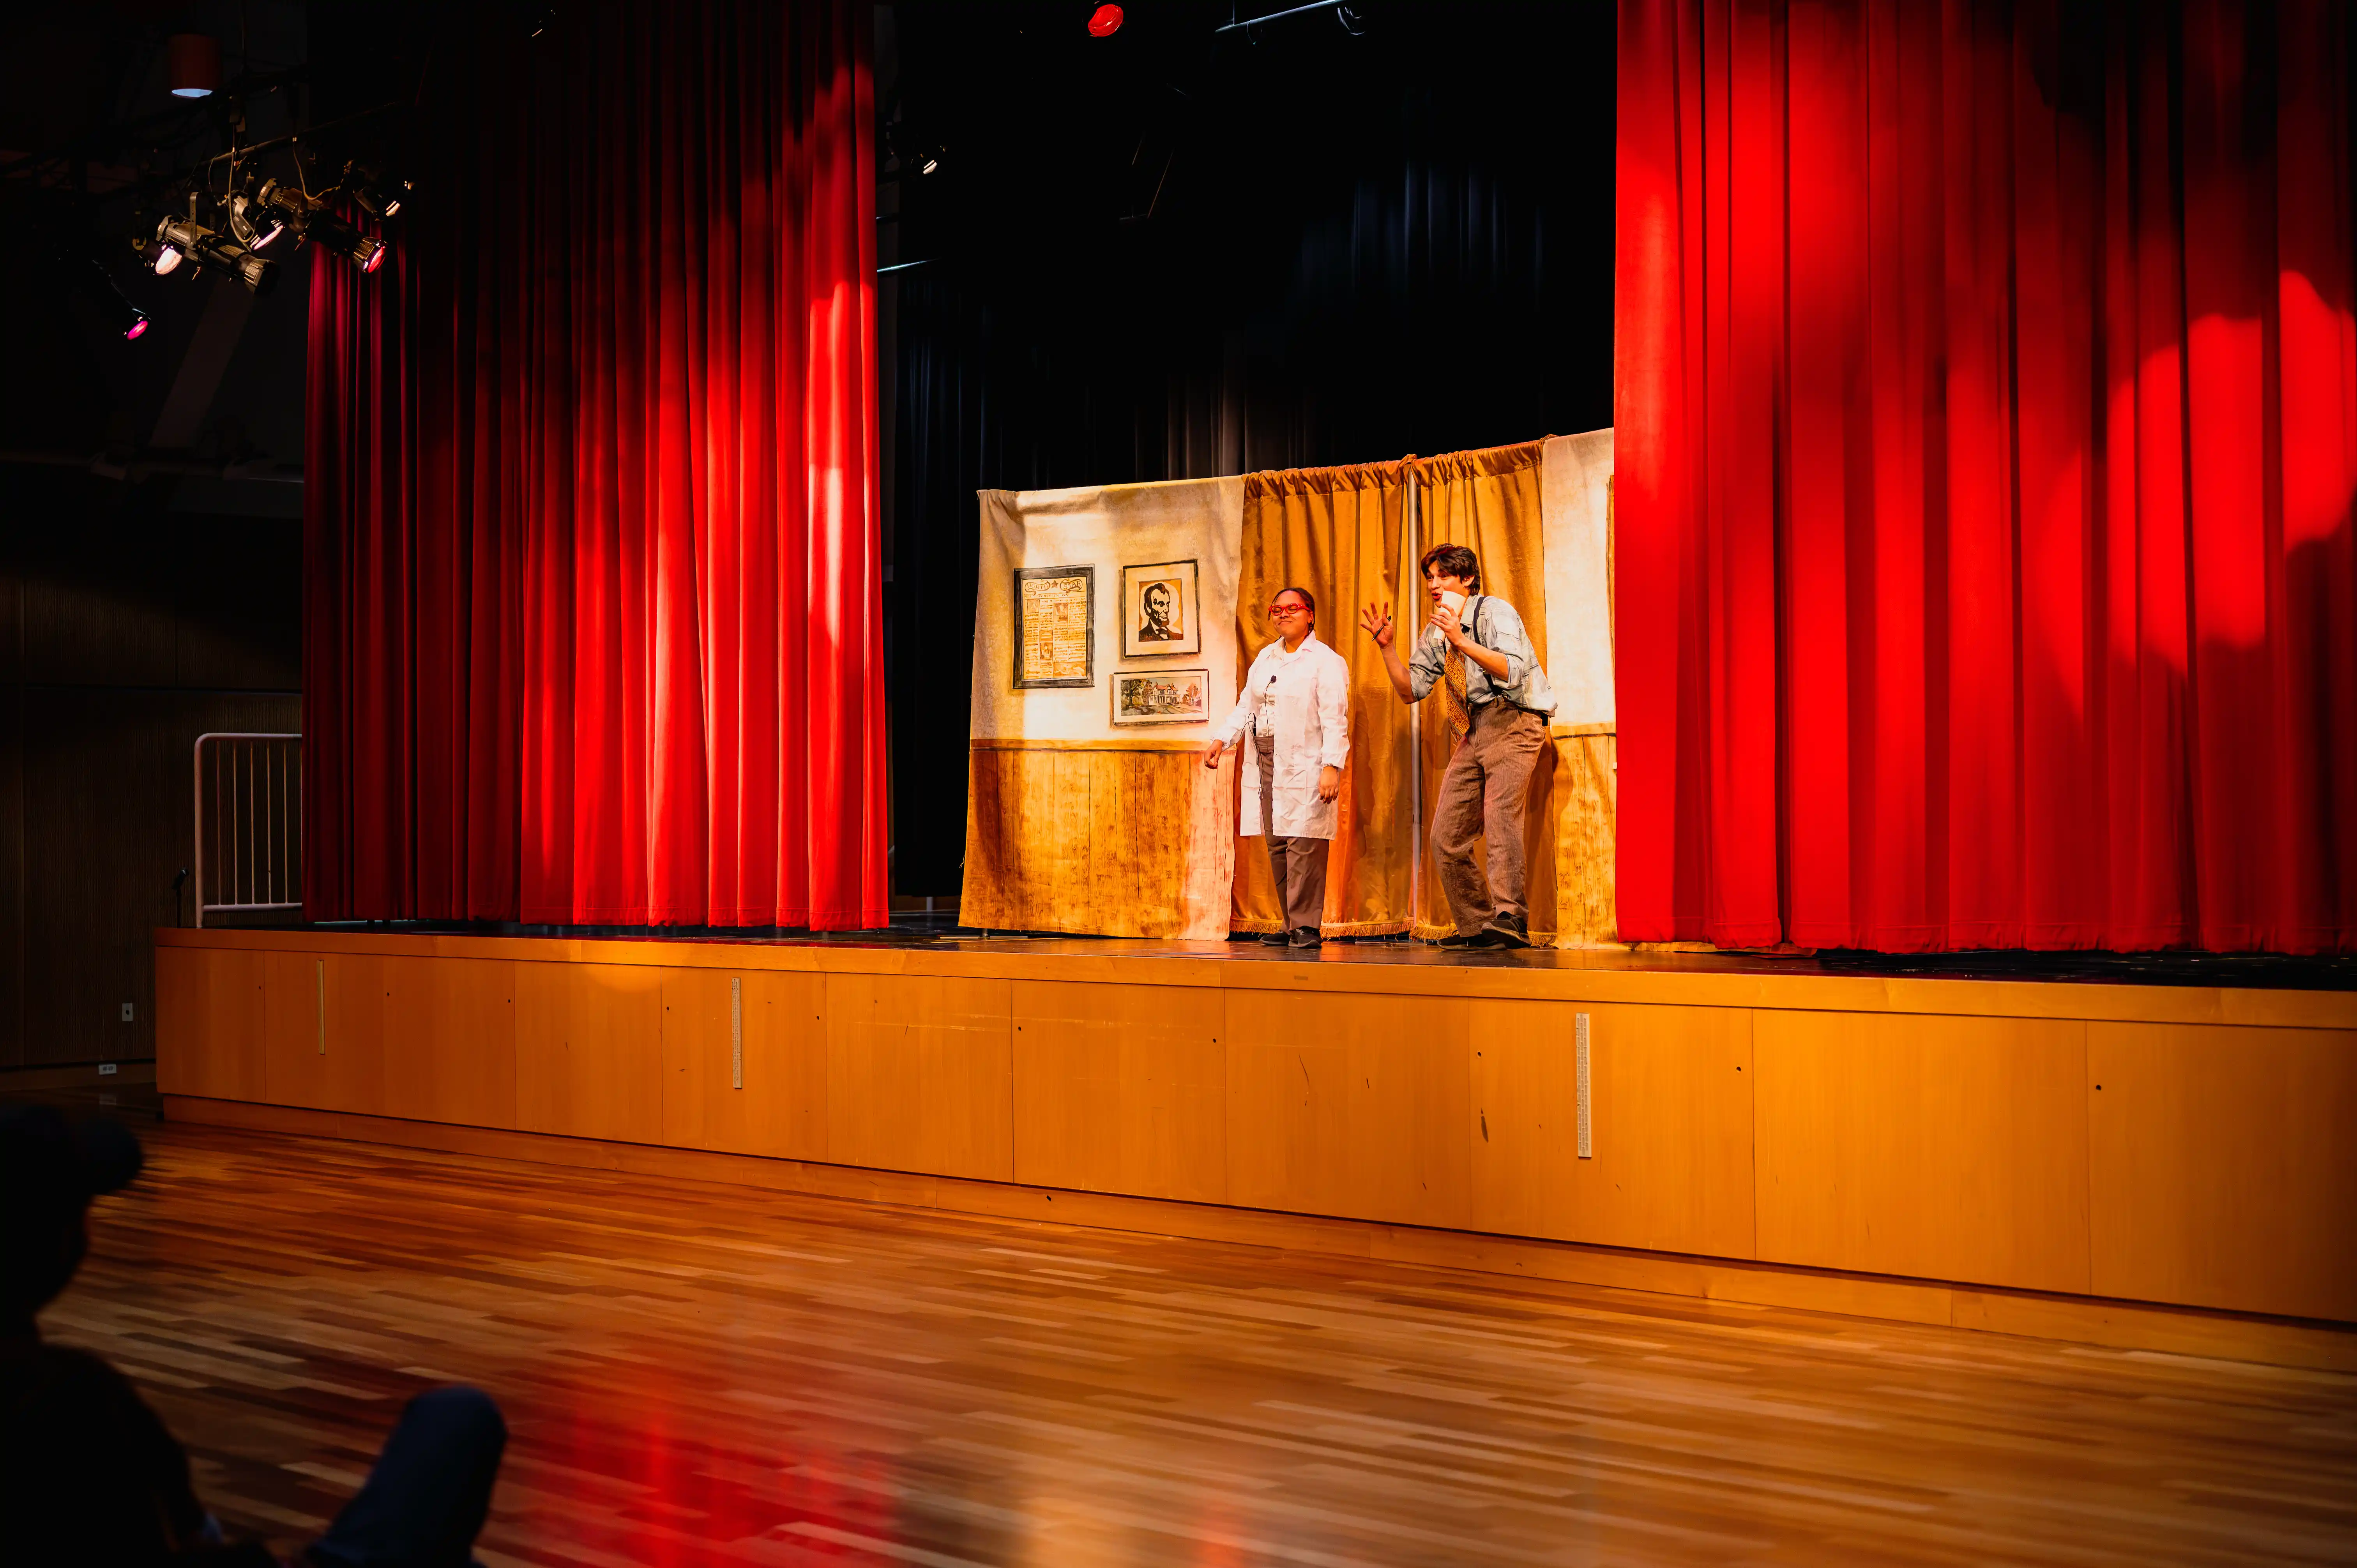 Two actors performing on stage in a theater with red curtains.